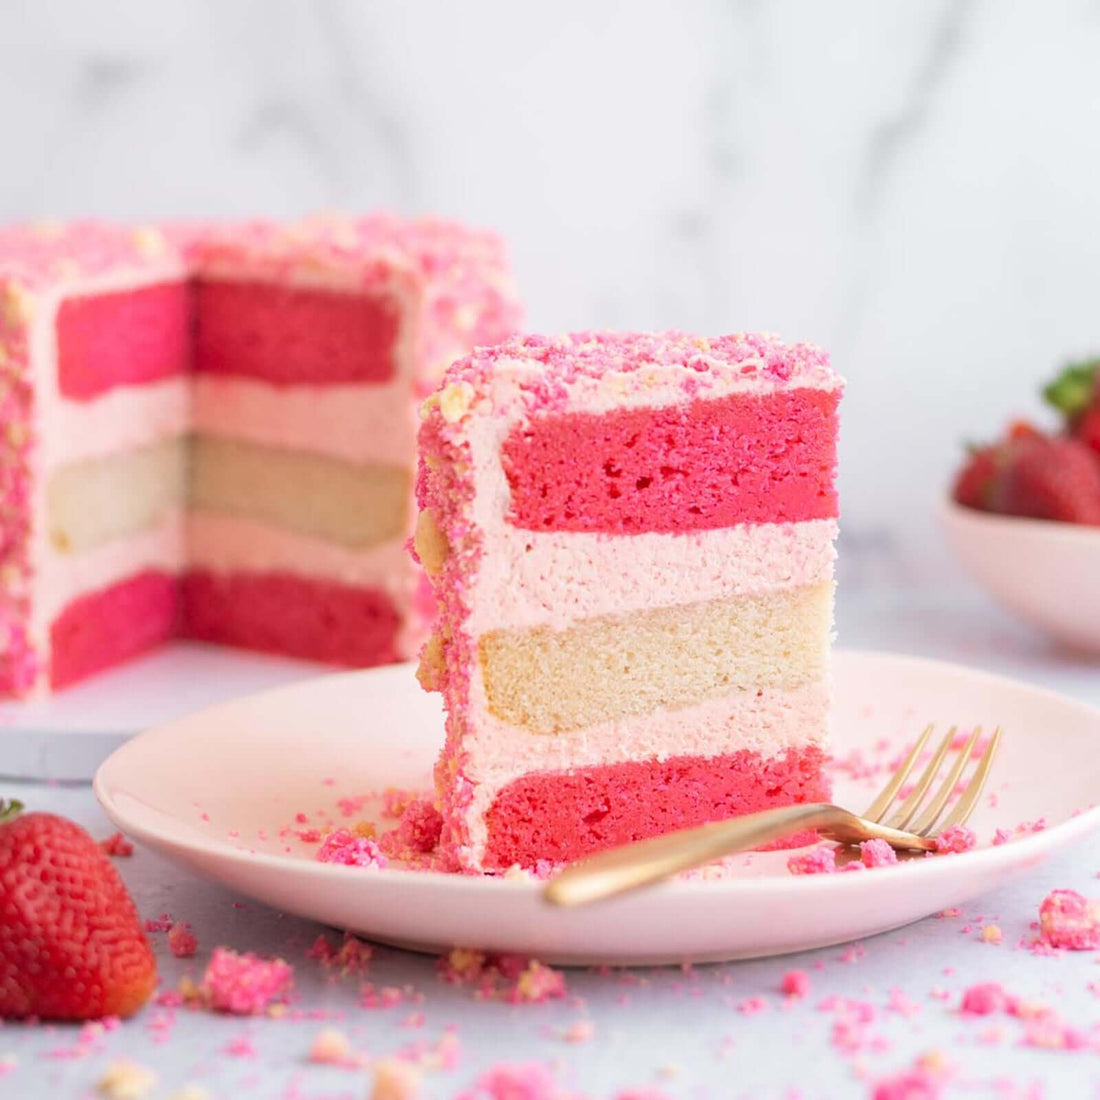 Vegan Strawberry Season is better when it's also gluten-free Some fun things to try this month at Karma Baker!Our Chocolate Strawberry cake is new with just the perfect amount of chocolate to the strawberry. Our all vegan creamy strawberry frosting is mad